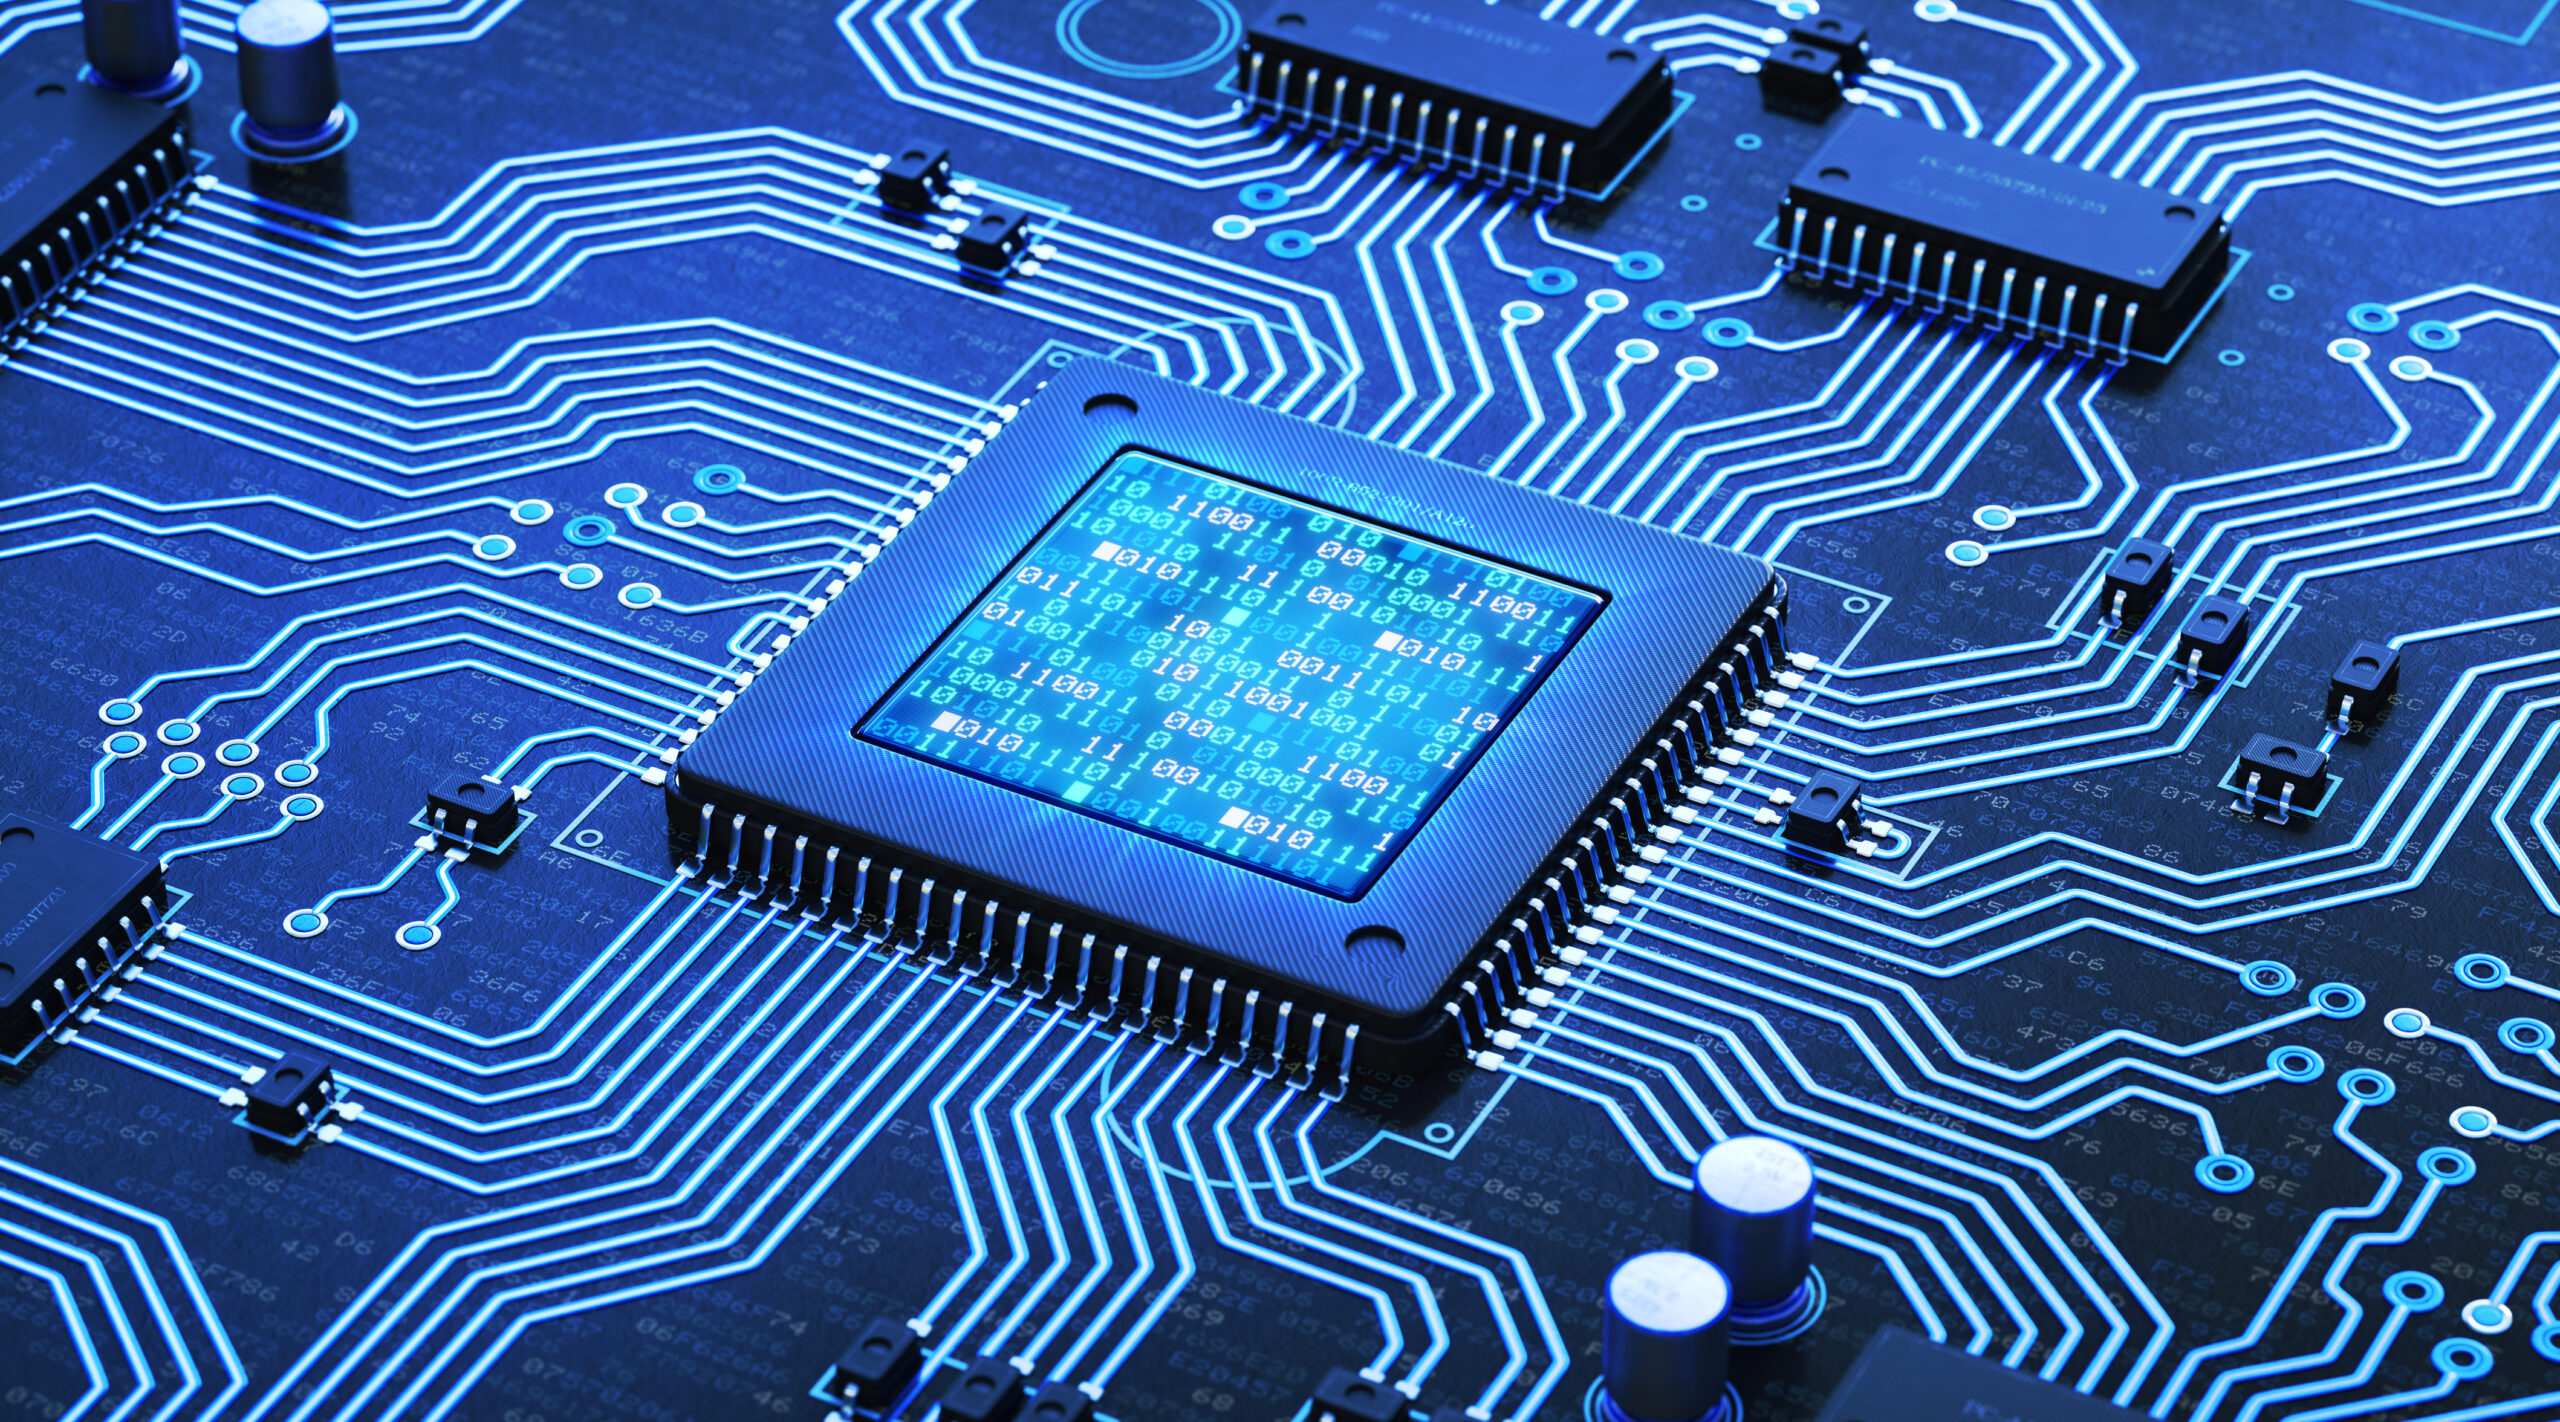 An abstract 3D render of a blue circuit board with many electrical components installed. The central microprocessor has an integrated LCD showing glowing binary code. Components are labelled with random serial numbers.